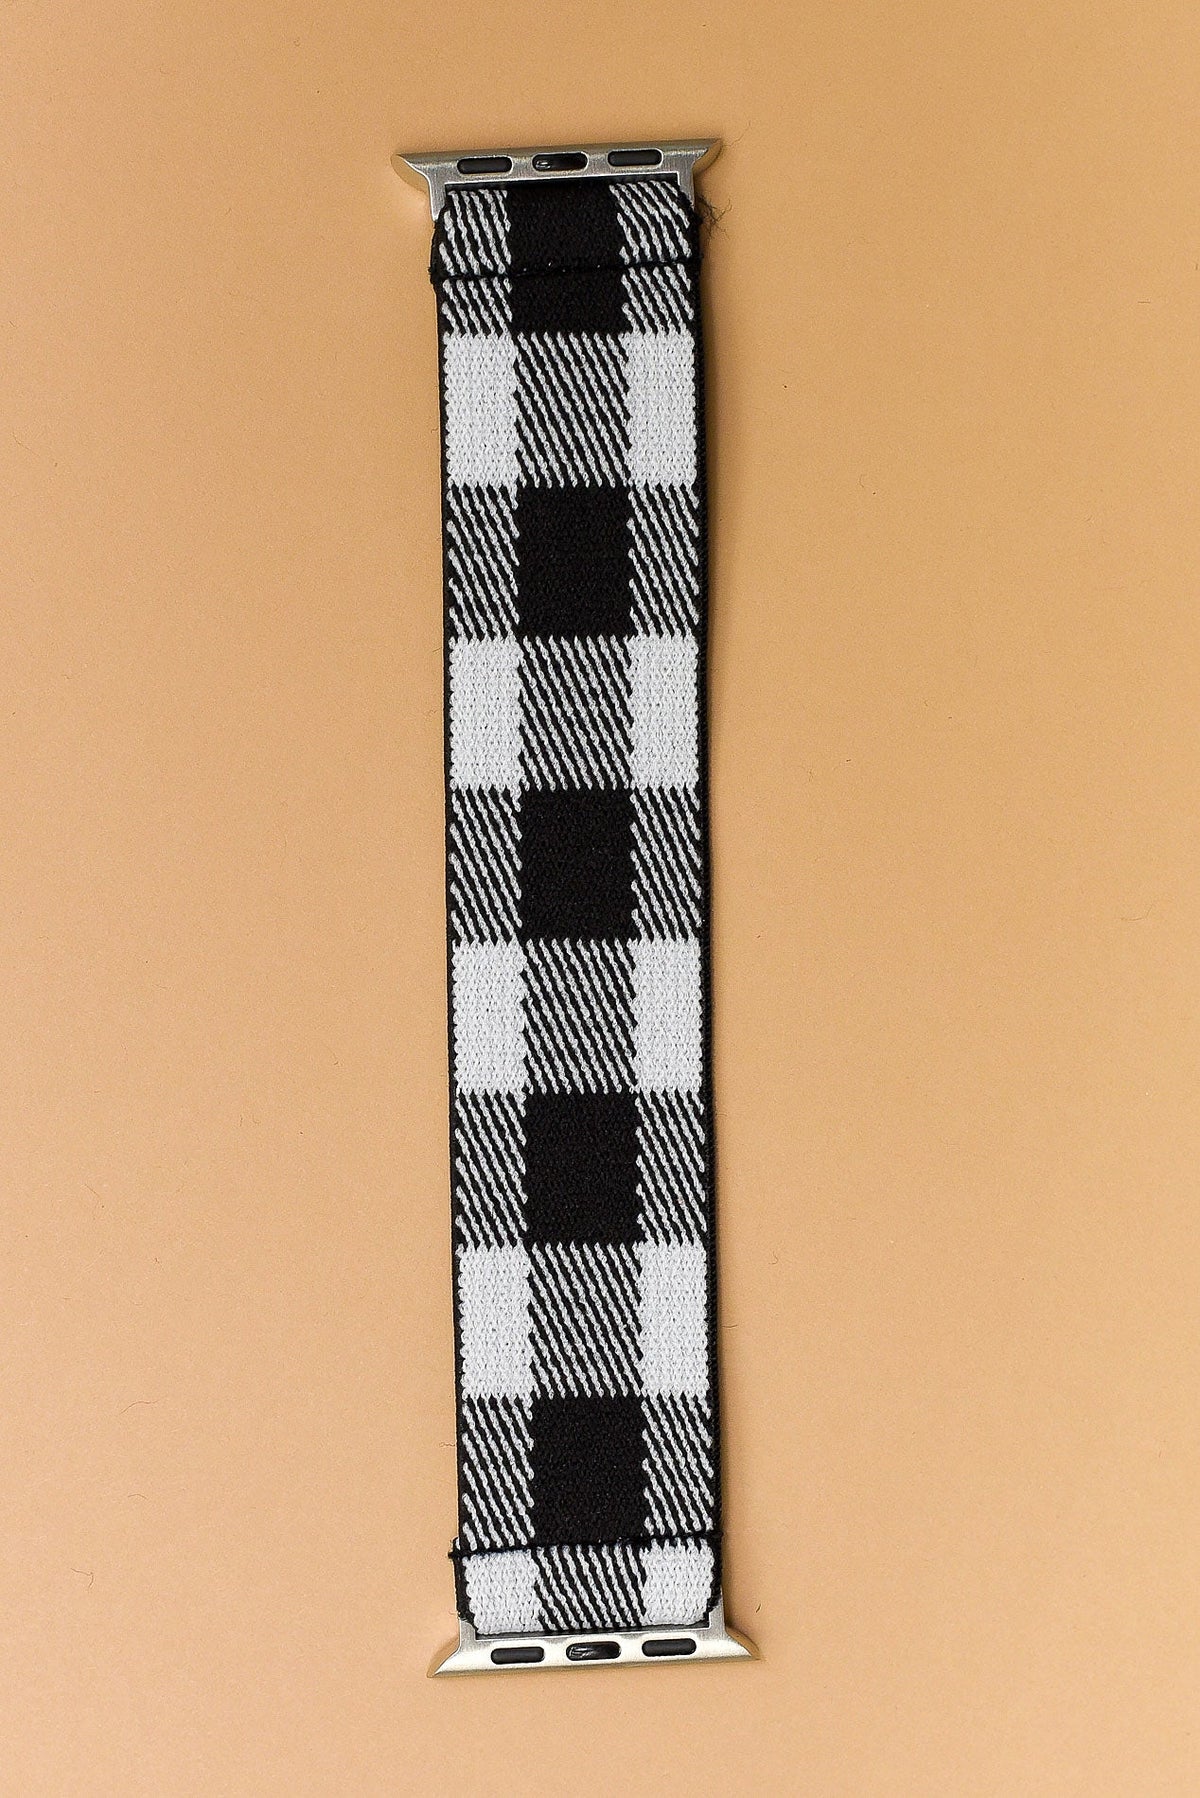 White/Black Checkered Stretchy Apple Watch Band (38/40MM) - WB043WH